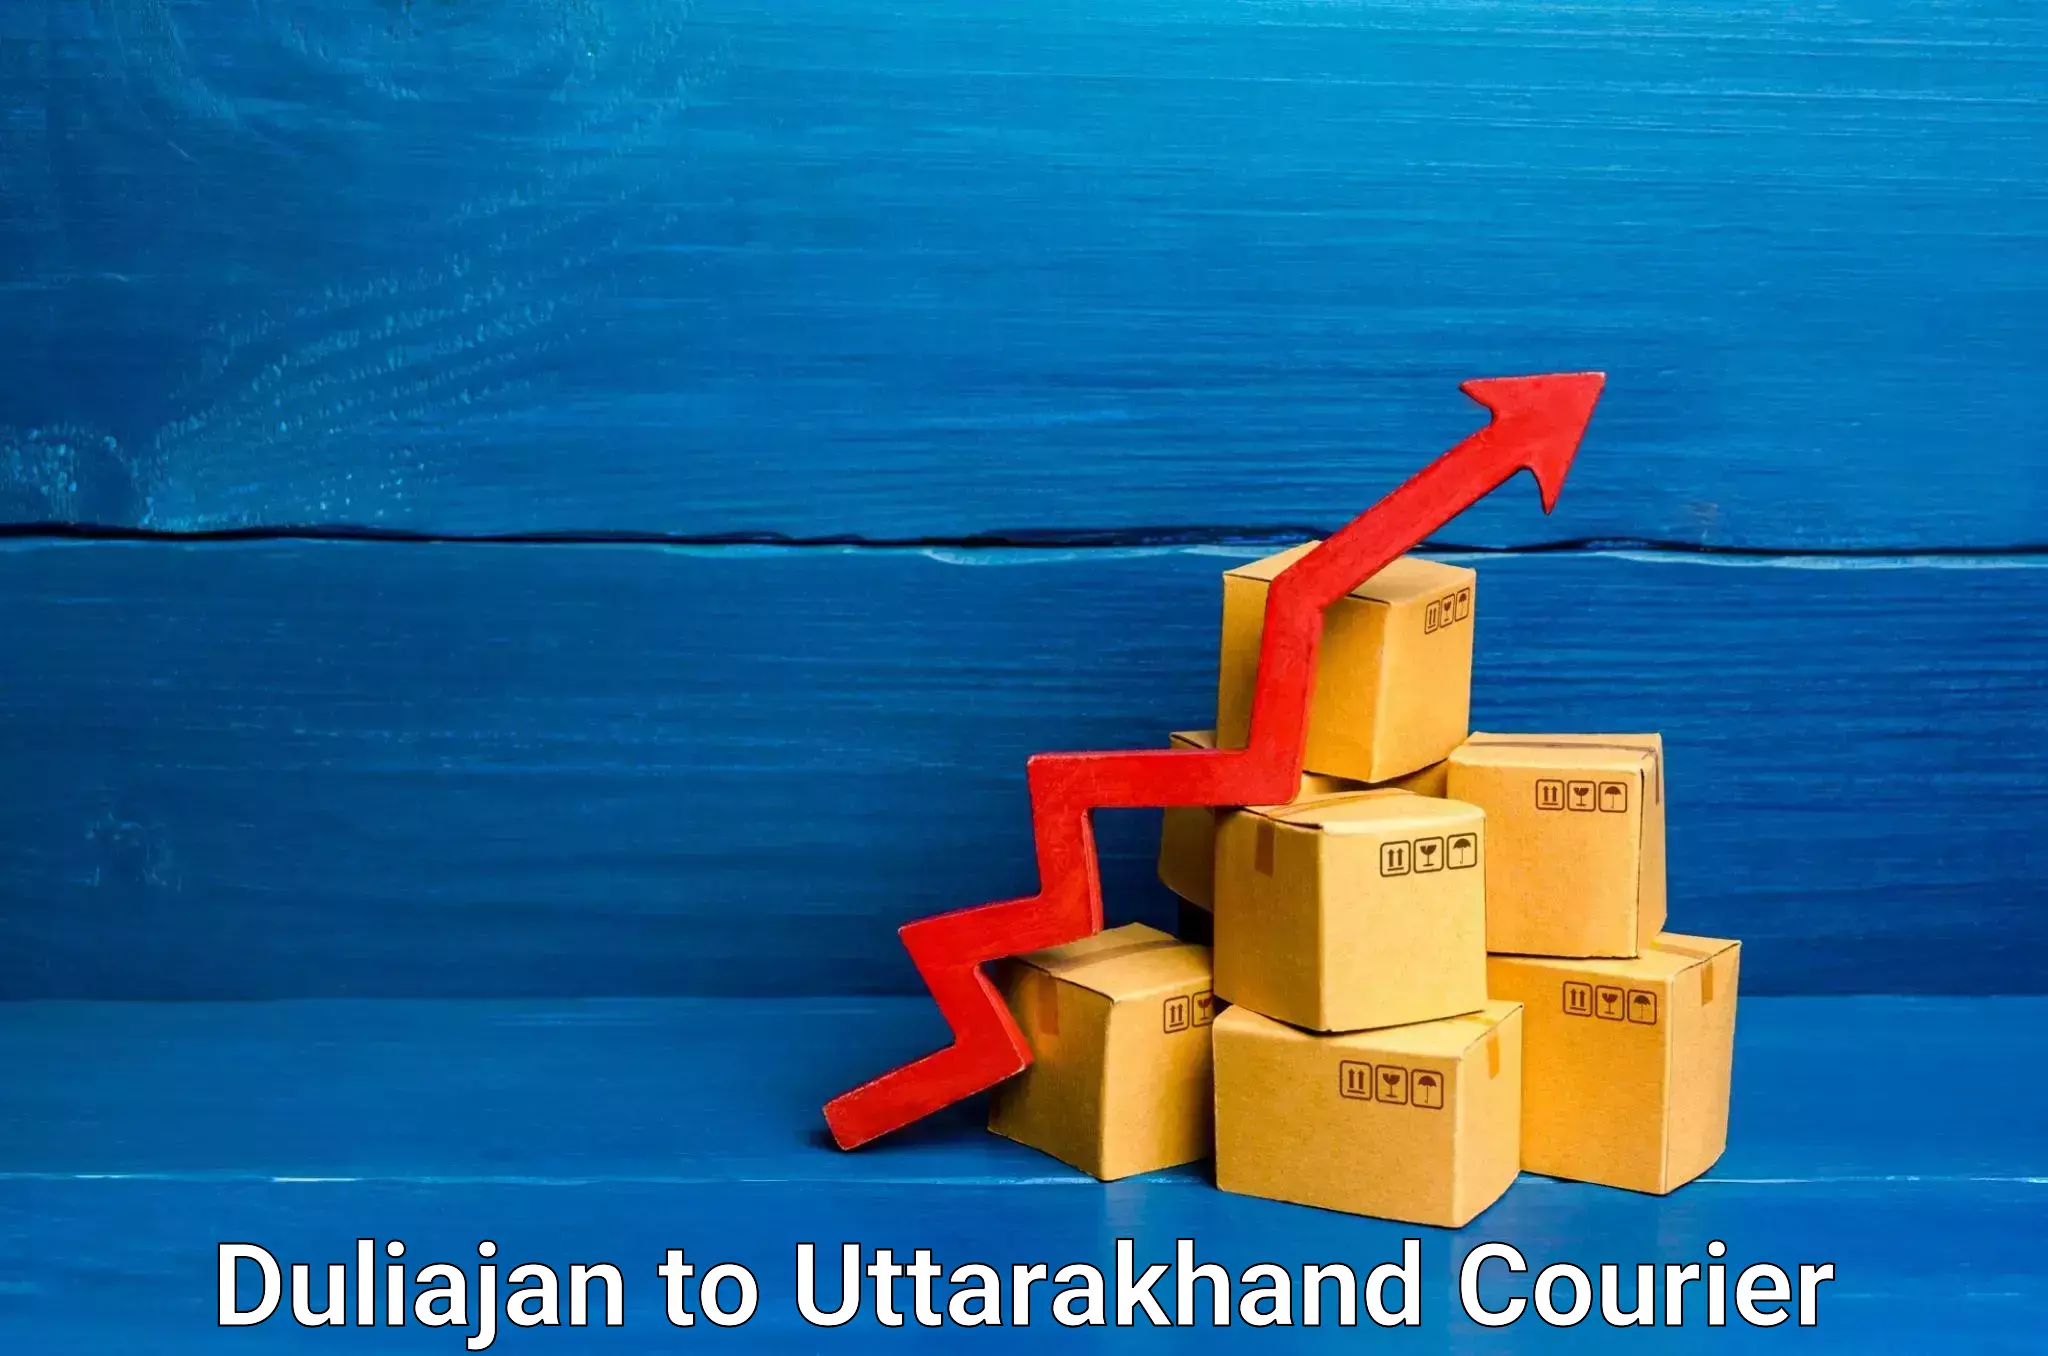 Multi-national courier services Duliajan to Gopeshwar